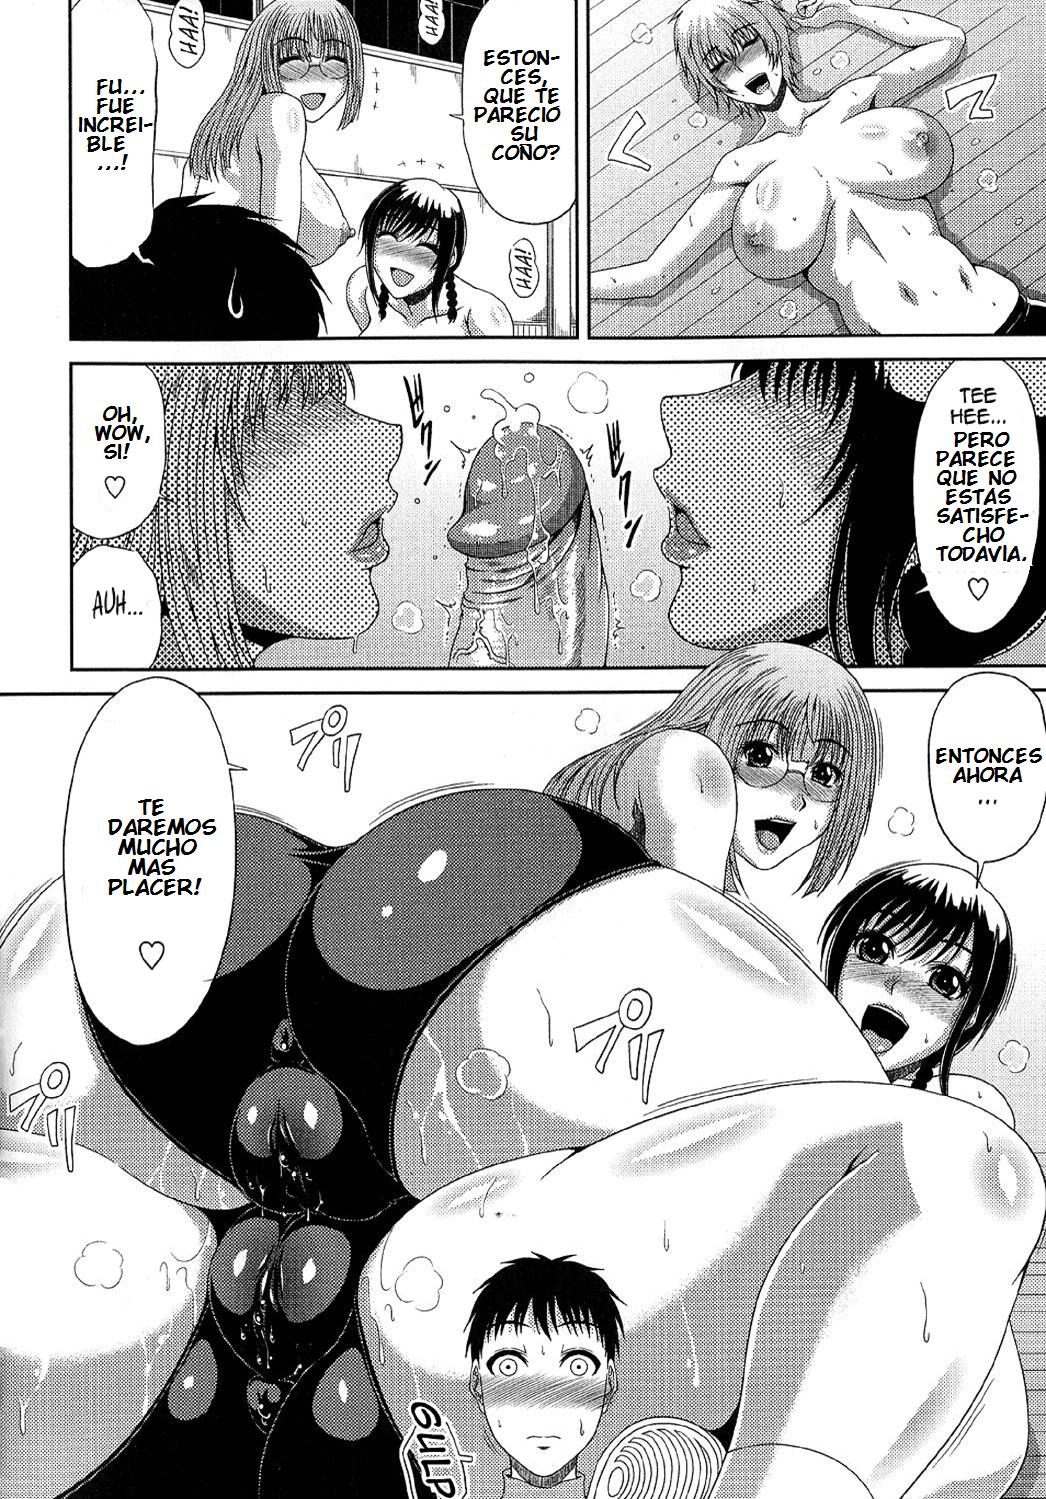 Mama-San VolleyBall Secret Lesson 1 Chapter-1 - 12